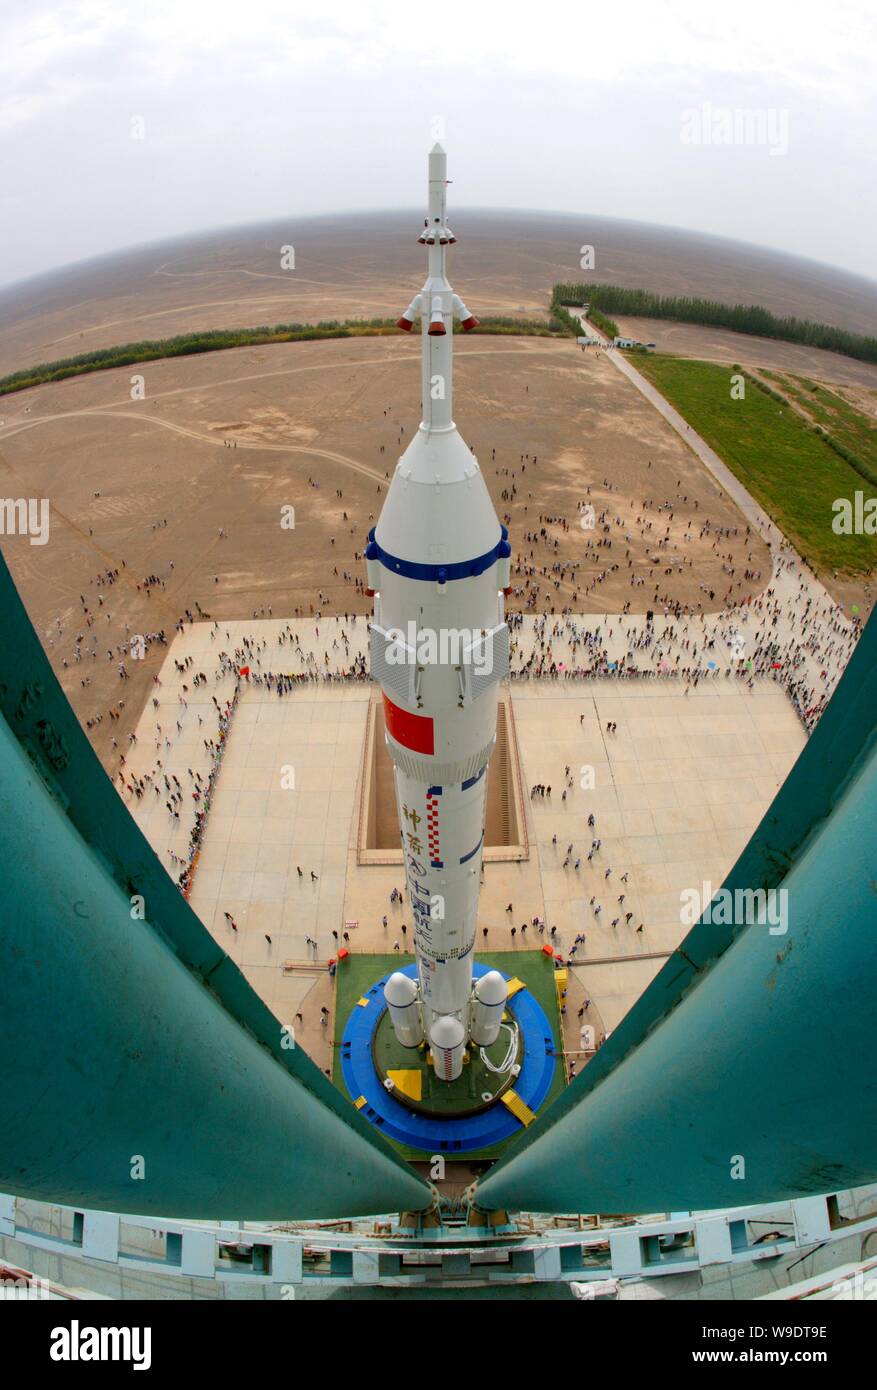 Chinese aeronautical scientists and workers fix a Long March 2F (CZ-2F) space rocket caryying the Shenzhou VII manned spacecraft on a launch pad at Ji Stock Photo